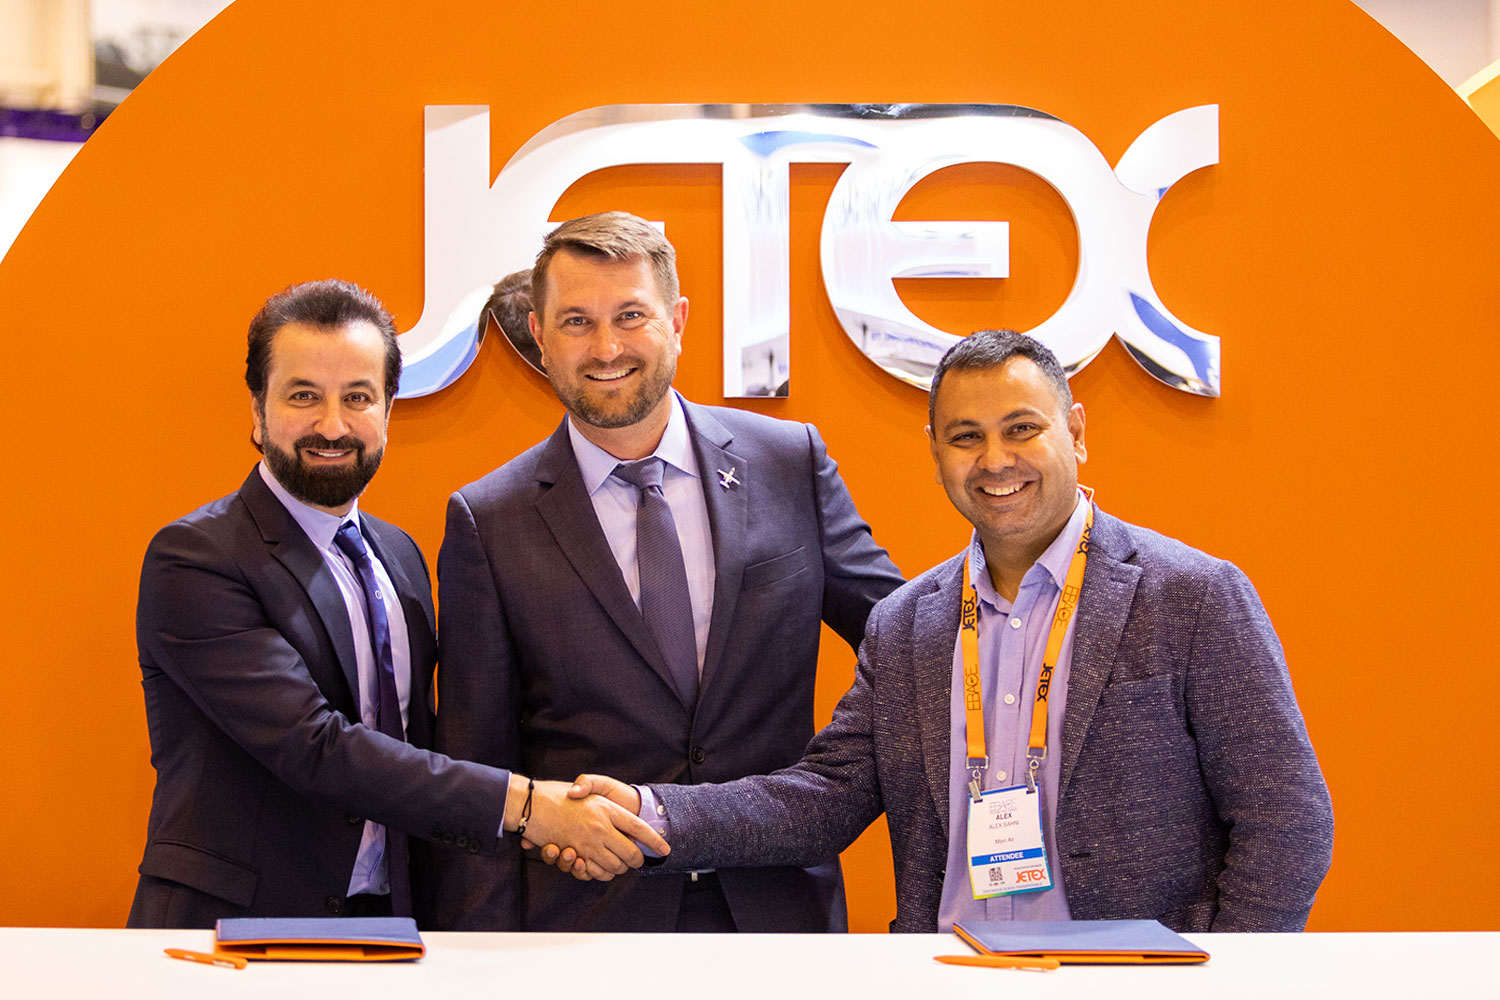 Jetex And Mavi Air Sign An Loi For The Acquisition Of Two Hondajet Aircraft